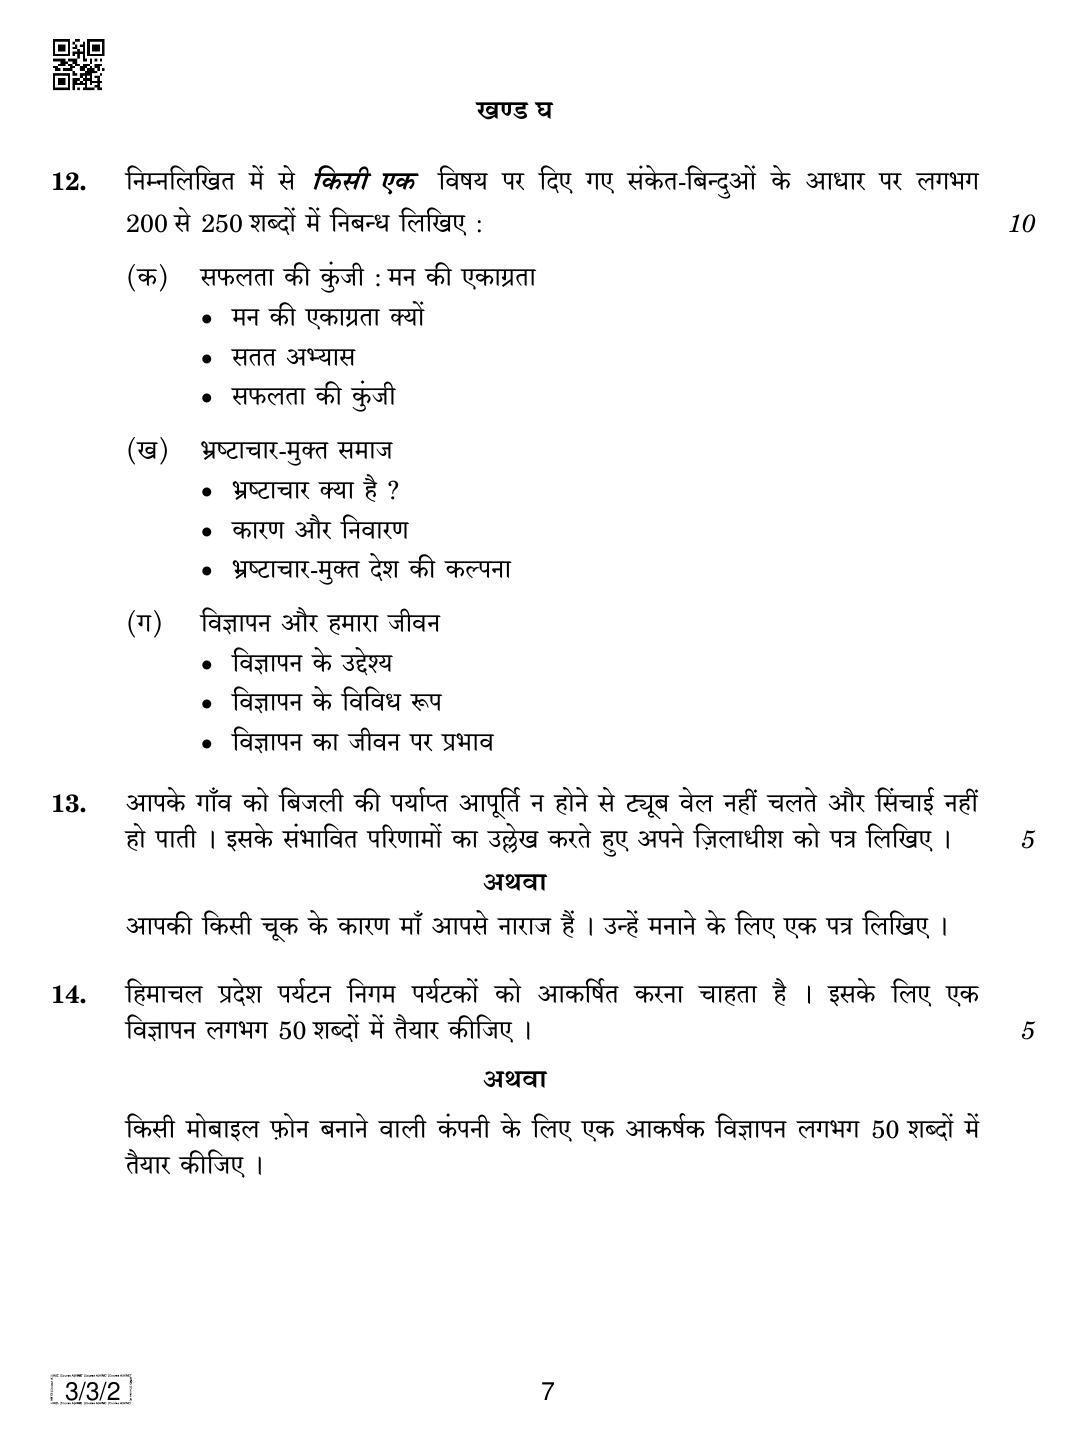 CBSE Class 10 3-3-2 HINDI COURSE- A 2019 Question Paper - Page 7